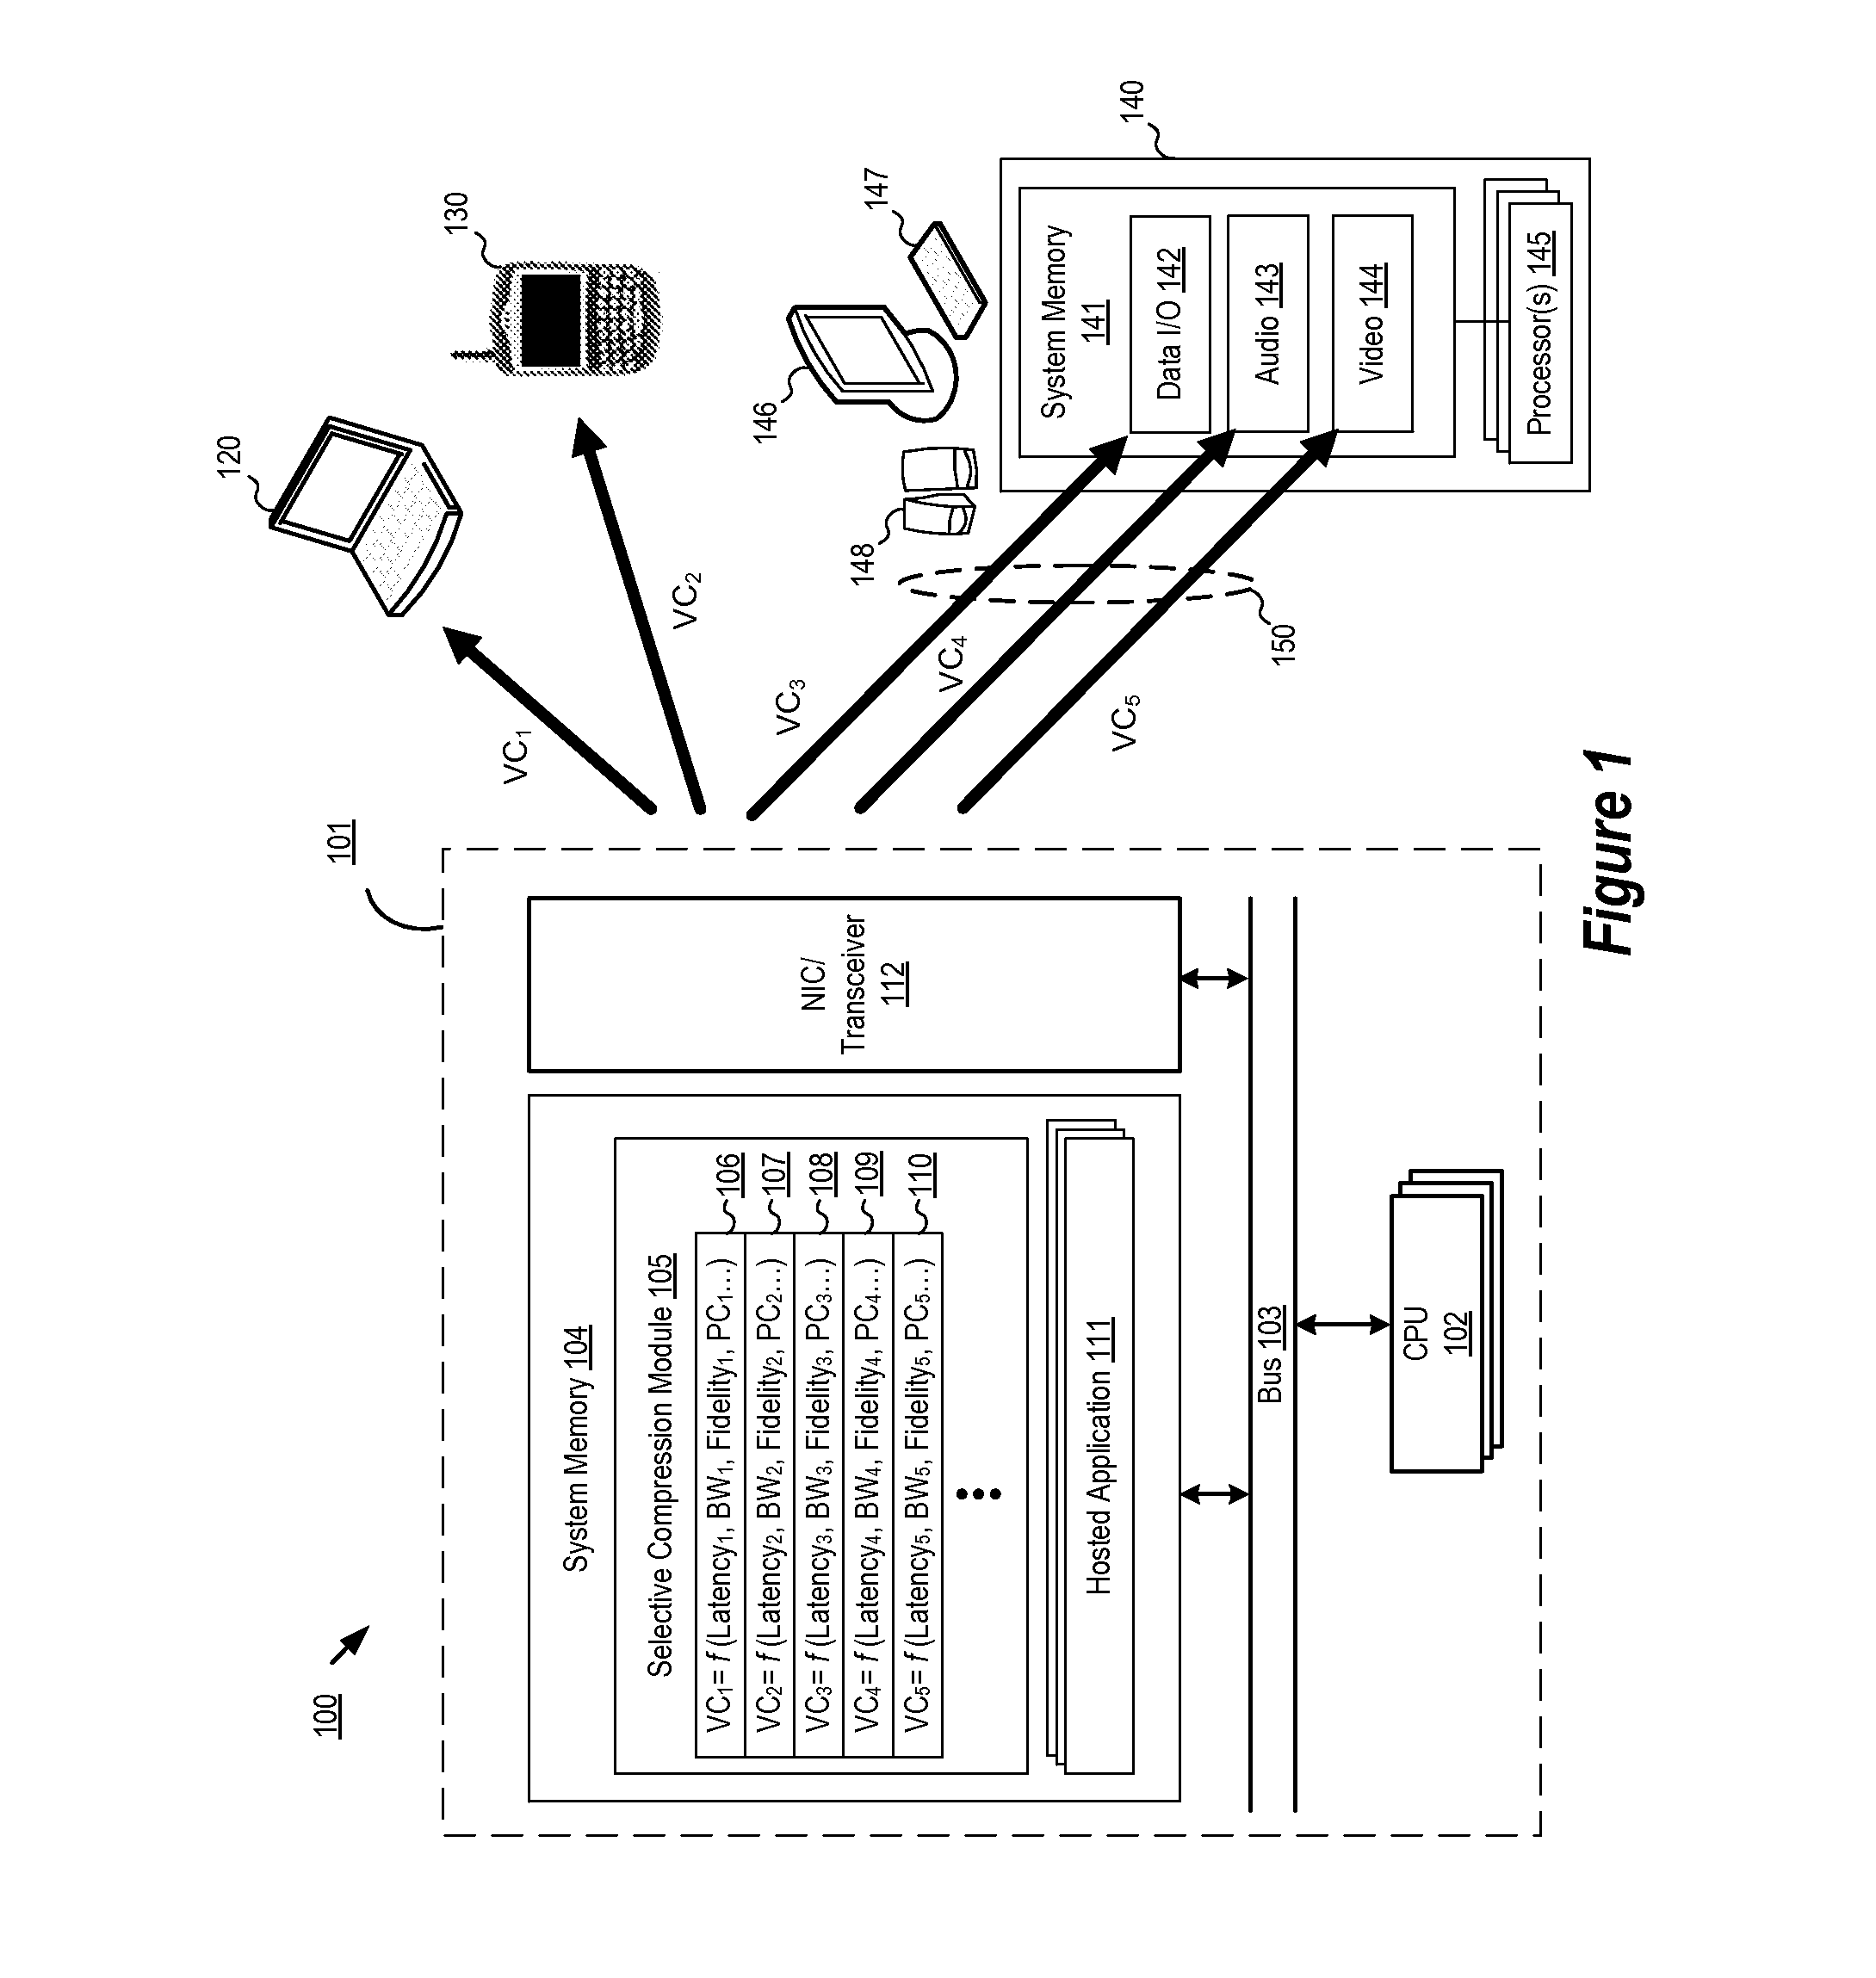 Selective Compression Based on Data Type and Client Capability